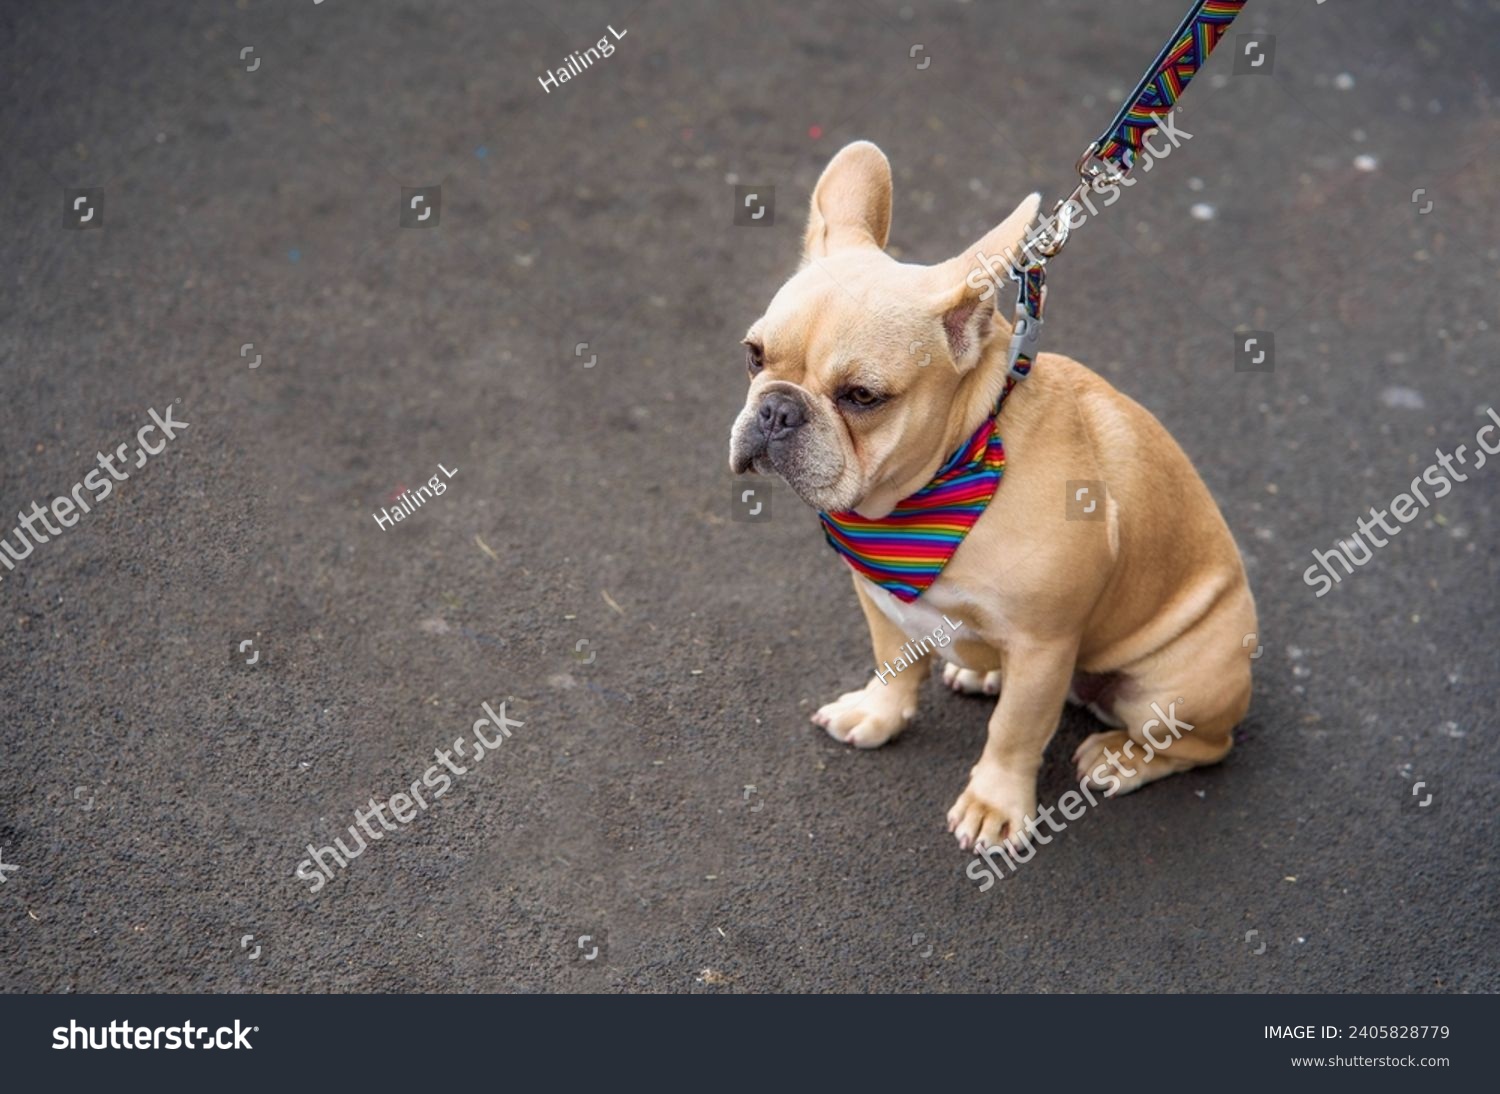 Curious companion: French bulldog, tethered, gazes intently, capturing a moment of whimsy and wonder in its focused gaze #2405828779